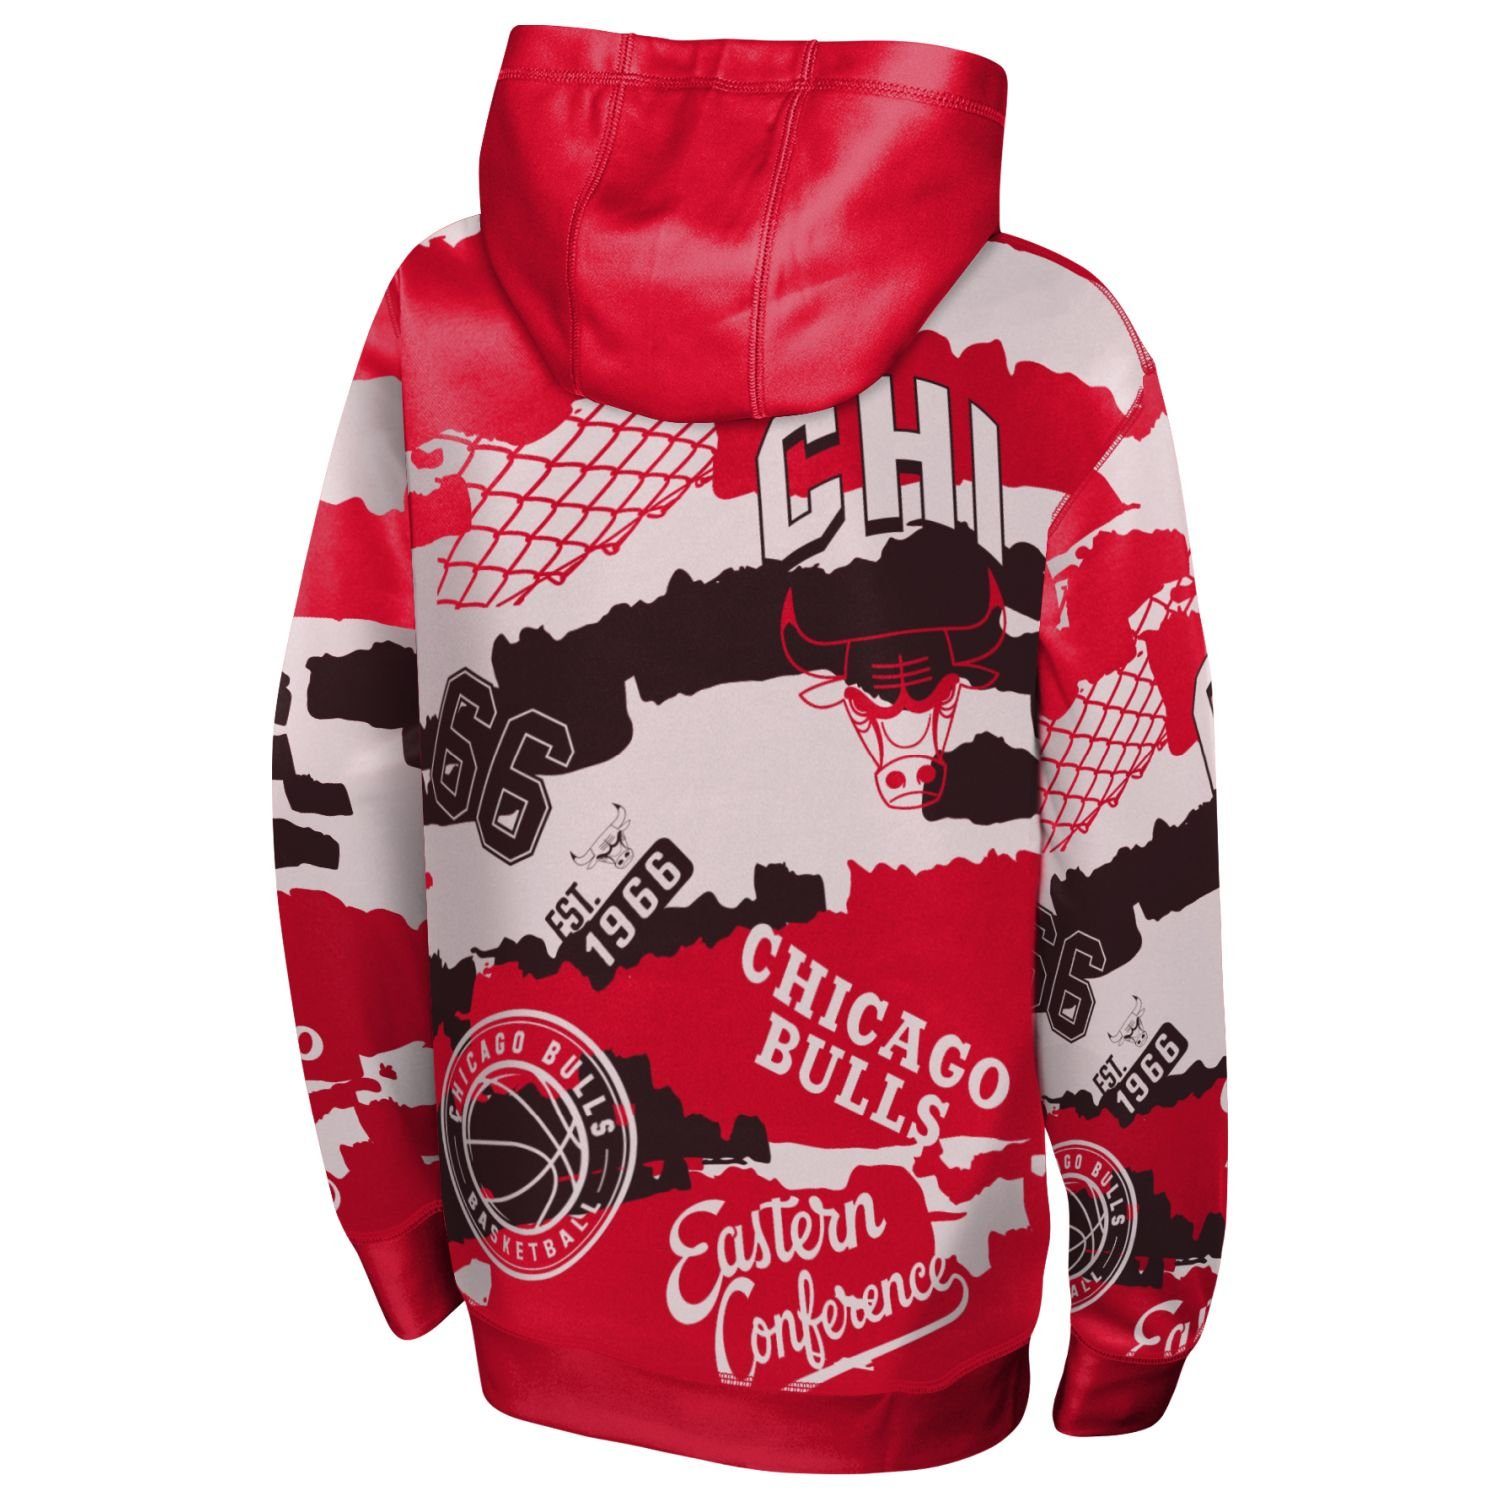 LIMIT Outerstuff Chicago Bulls Kapuzenpullover Sublimated NBA THE